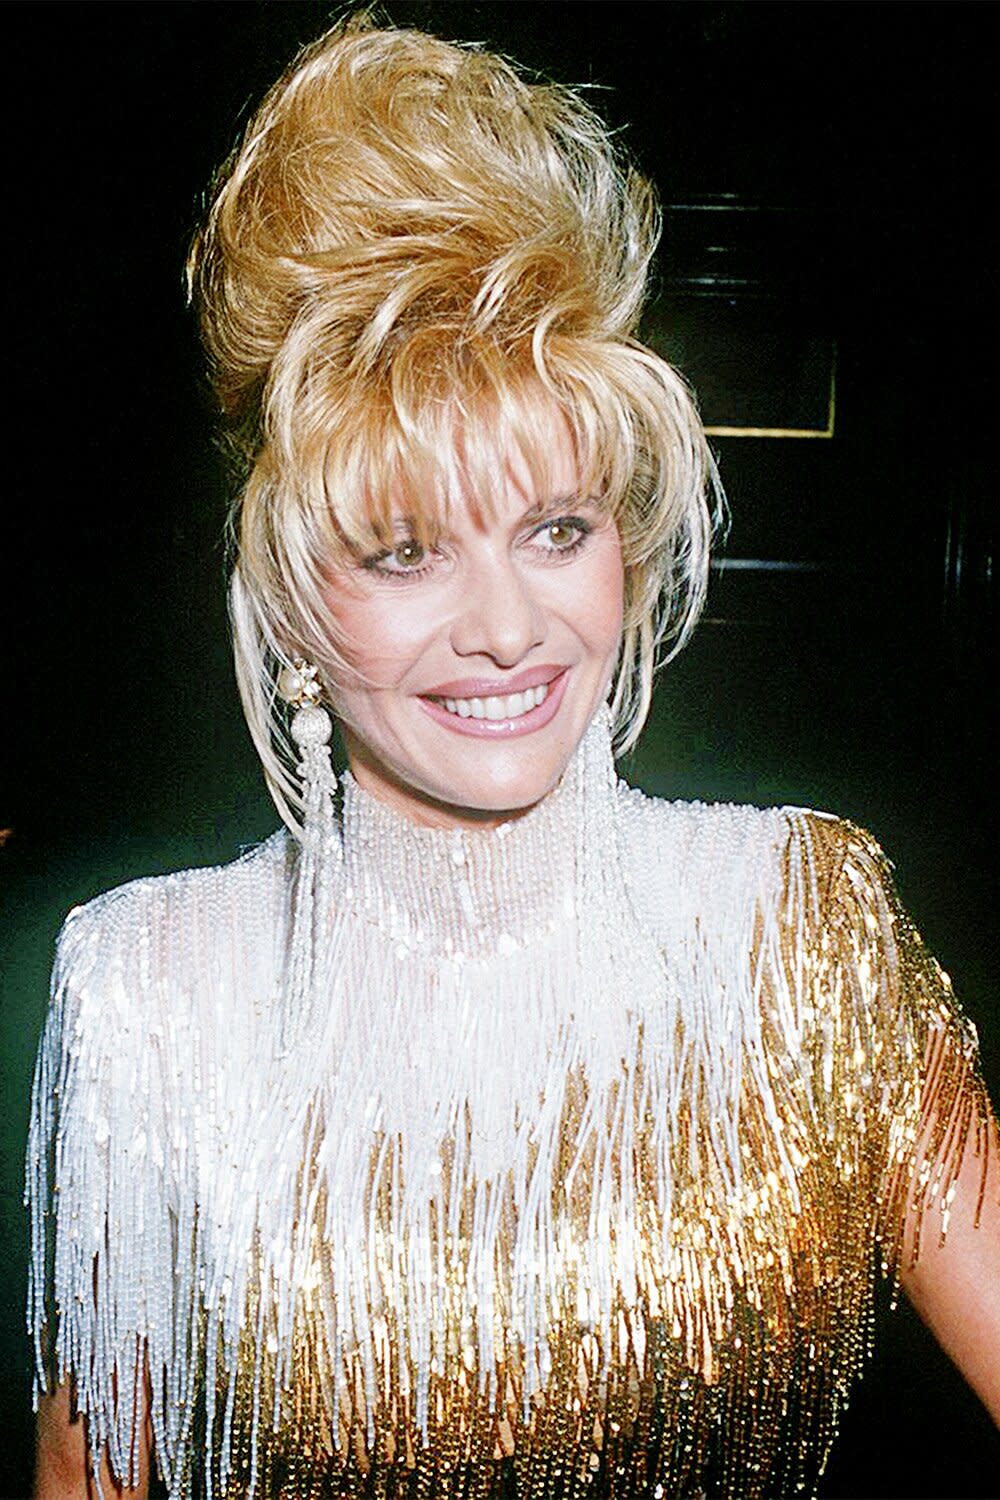 Socialite Ivana Trump, circa 1992. (Photo by Kypros/Getty Images)